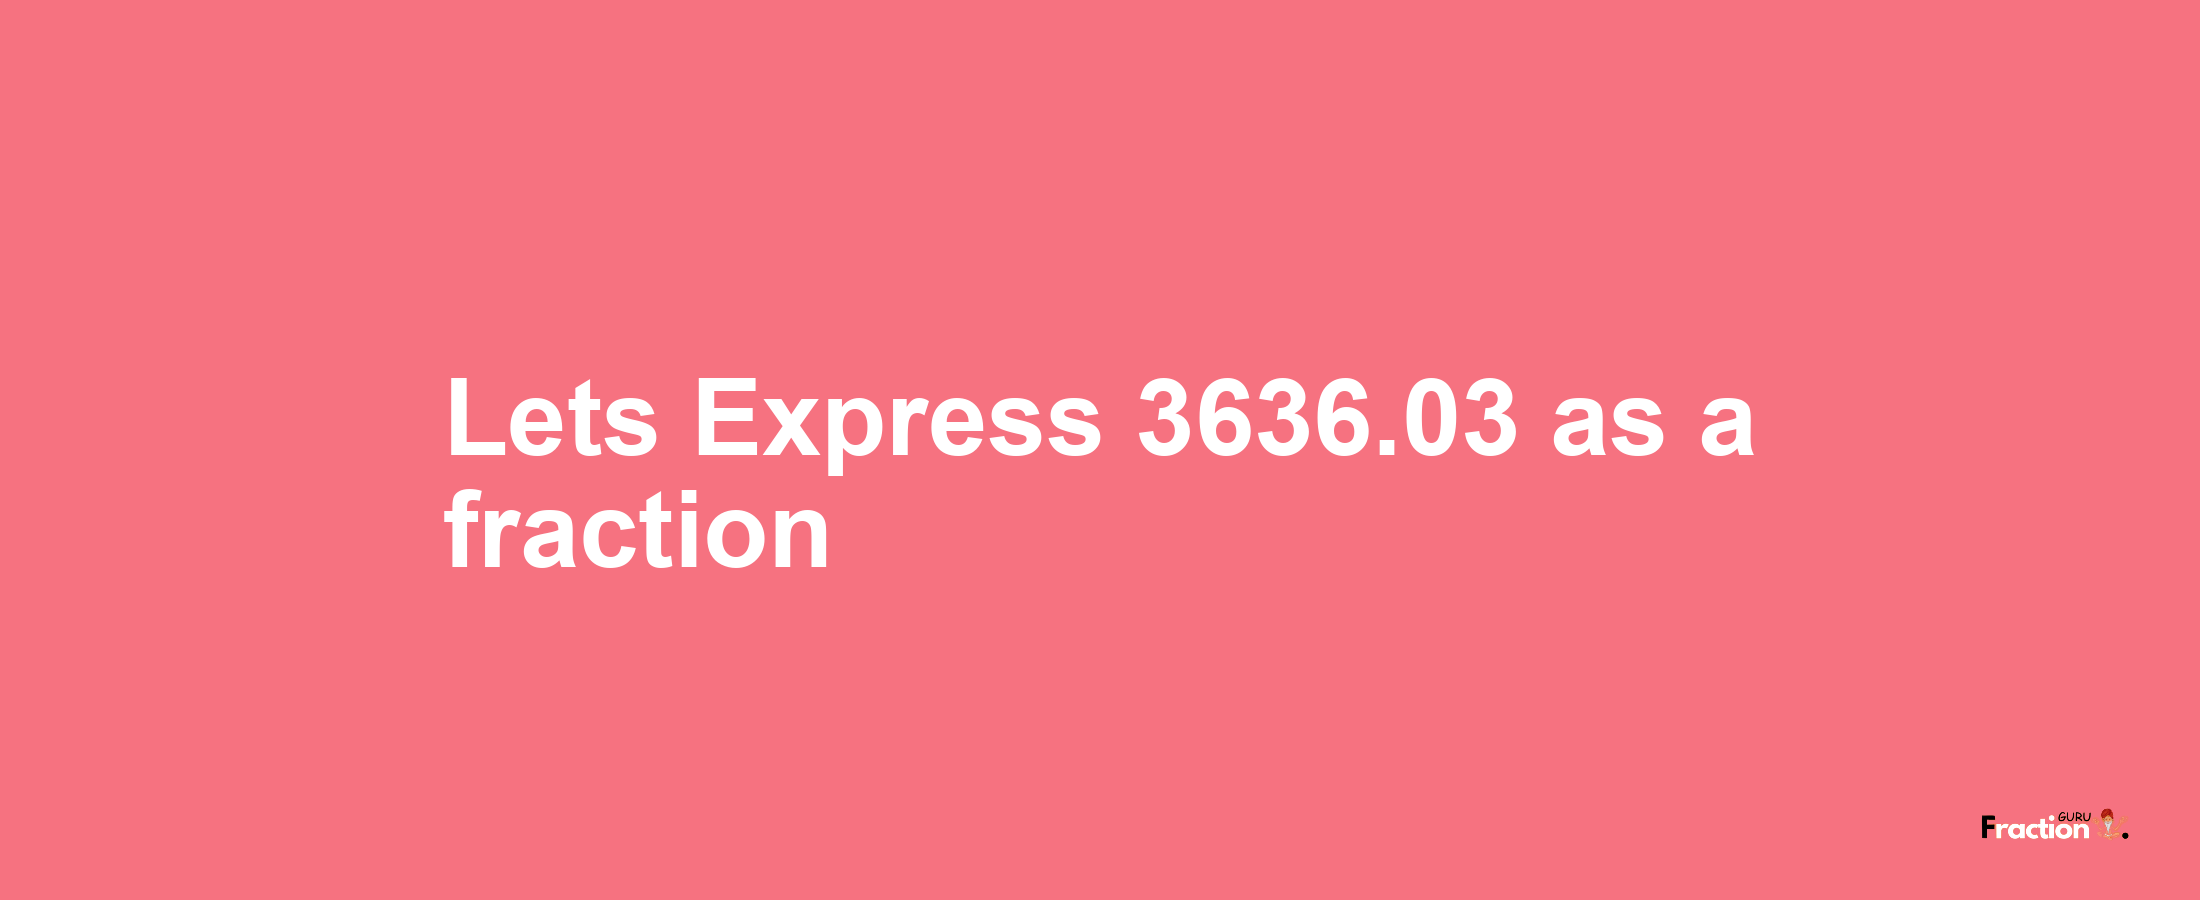 Lets Express 3636.03 as afraction